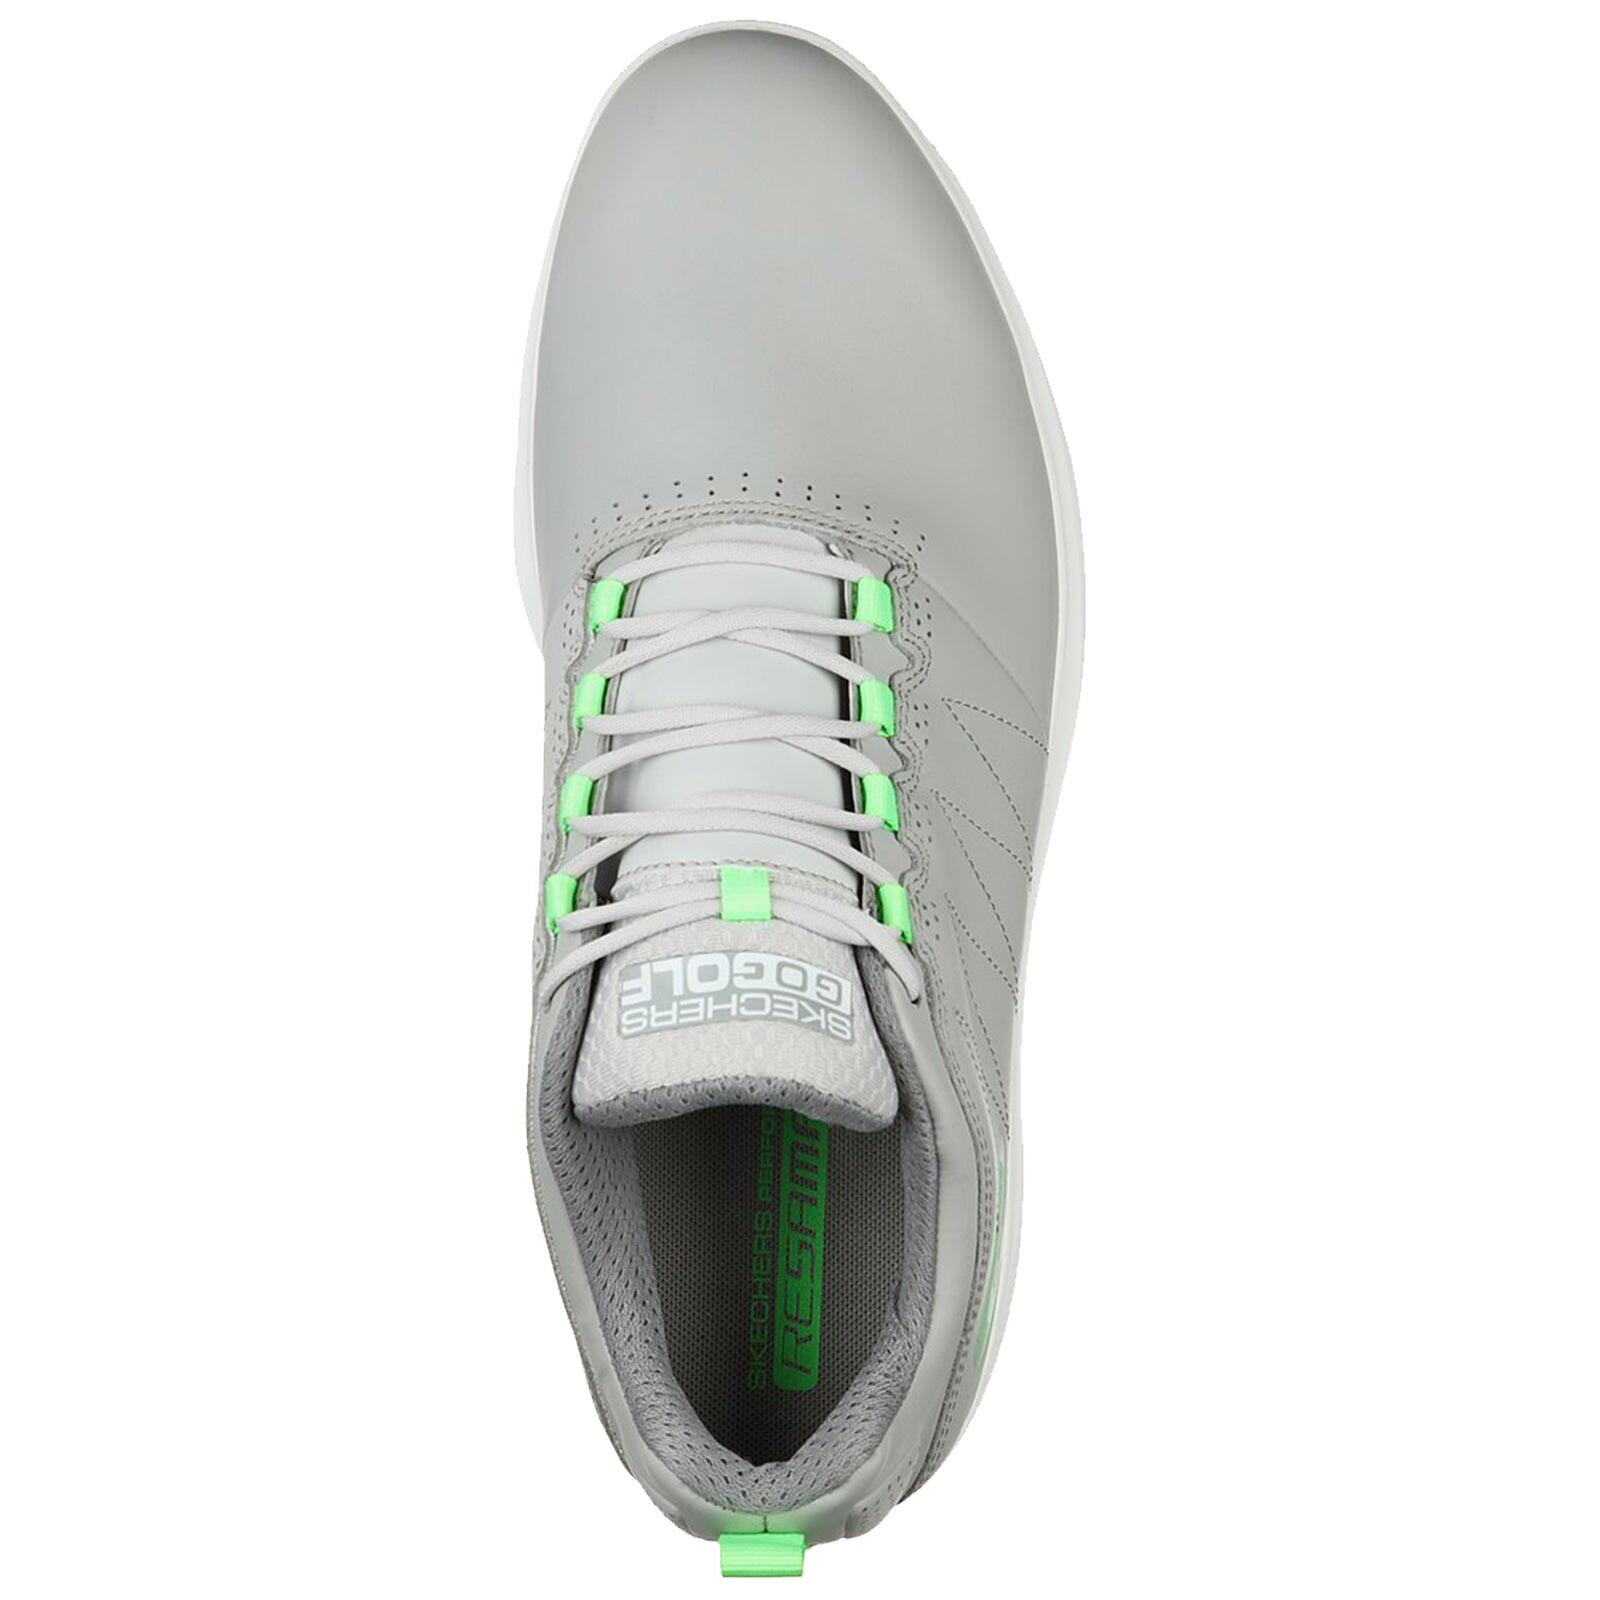 Skechers Mens PRO 4 LEGACY Golf Shoes - GREY/LIME 6/7